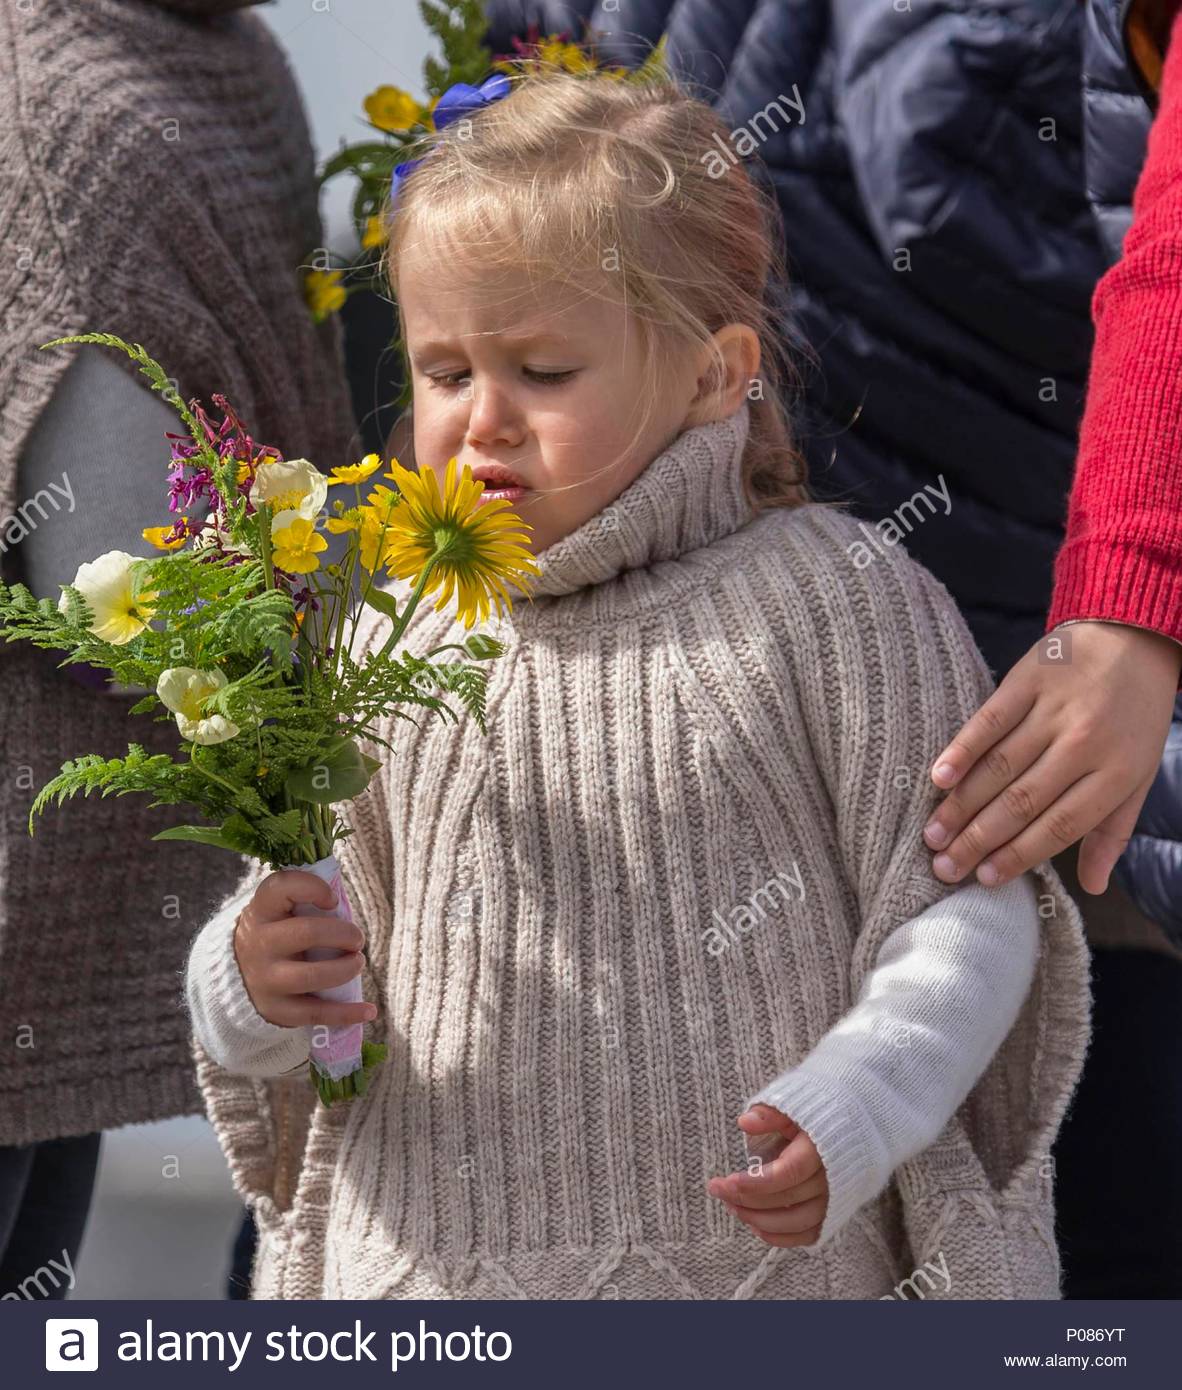 princess-josephine-no-web-until-august-14-2014-the-crown-prince-couples-official-visit-to-greenland-with-their-four-children-from-august-1-to-august-8-2014-hrh-crown-prince-frederik-hrh-crown-princess-mary-hrh-prince-christian-hrh-princess-isabella-hrh-princess-josephine-and-hrh-prince-vincent-are-visiting-paamiut-monday-4th-august-arrival-with-royal-yacht-dannebrog-and-welcome-in-the-habour-visit-at-family-centre-and-prevention-office-tiloq-they-tries-pedalos-at-airport-island-and-the-children-runs-and-jumps-in-the-hills-prince-christian-takes-part-in-a-staffed-with-local-P086YT.jpg